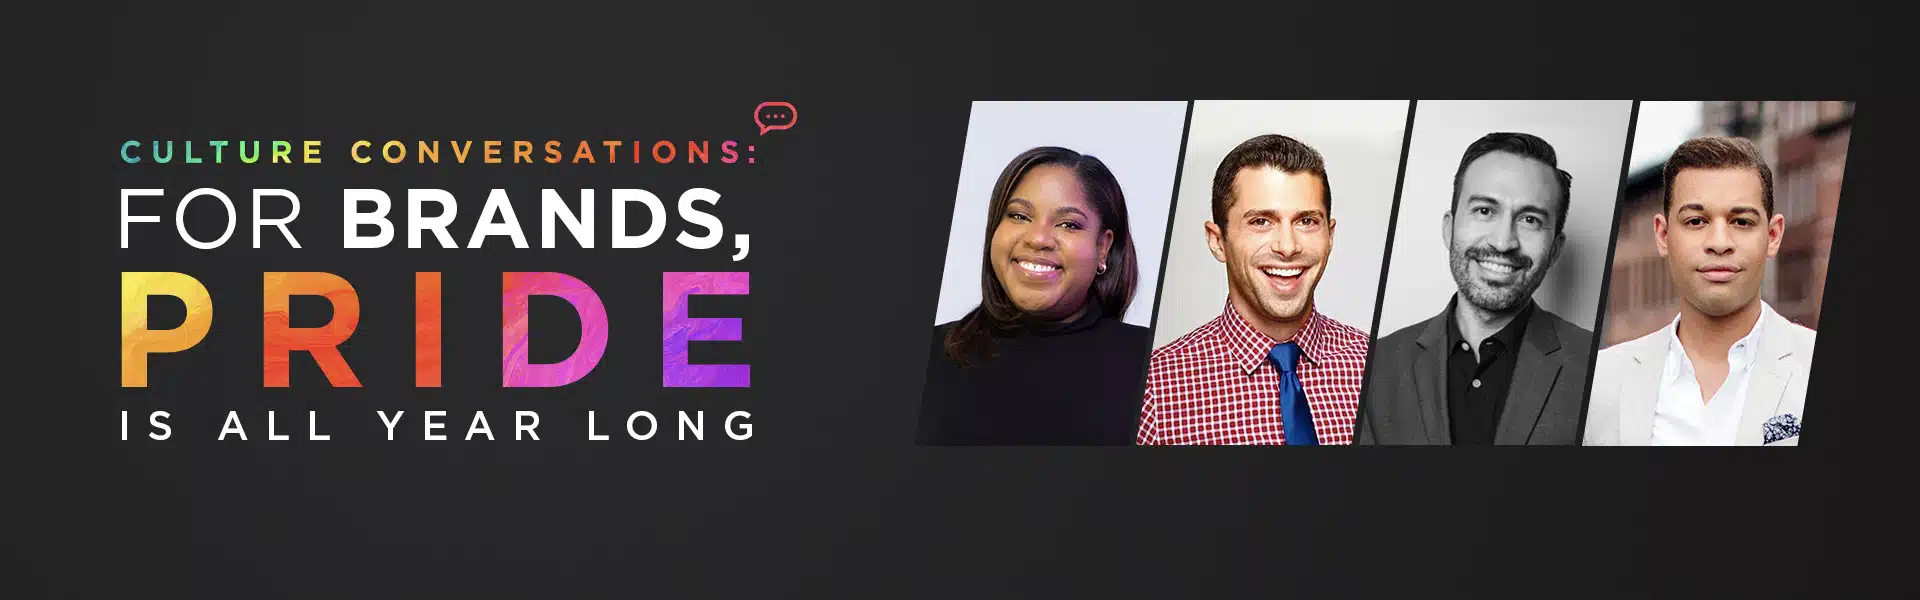 Culture Conversations: For Brands, Pride is All Year Long blog header